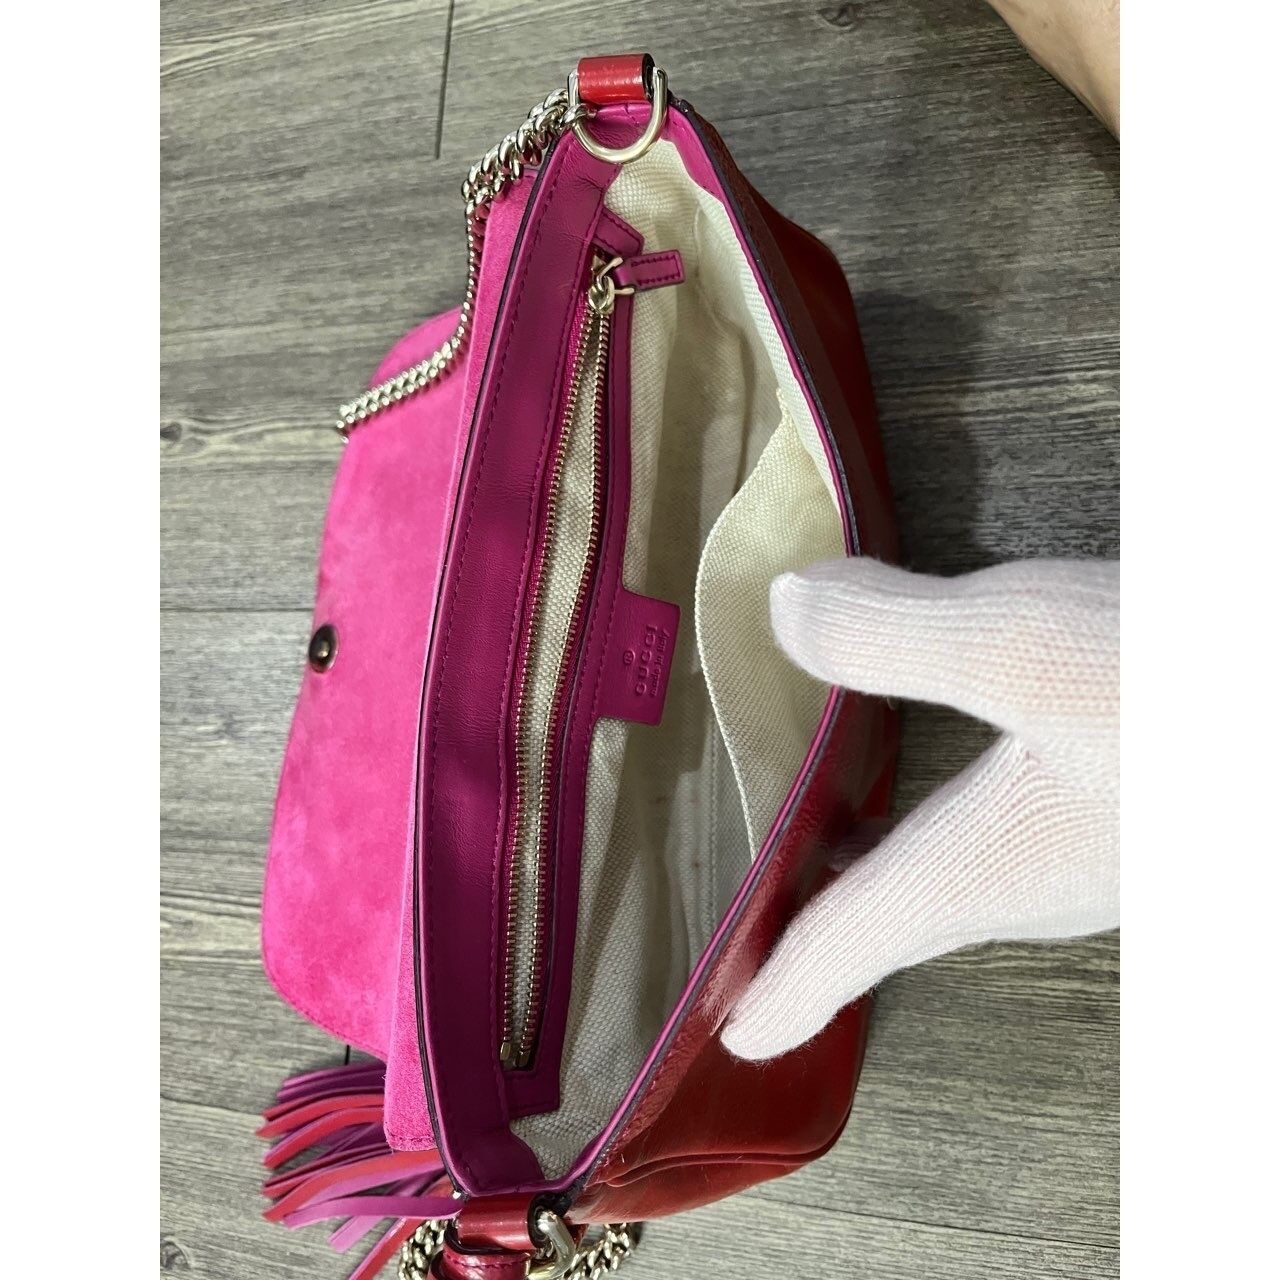 Gucci Red Sling Bag